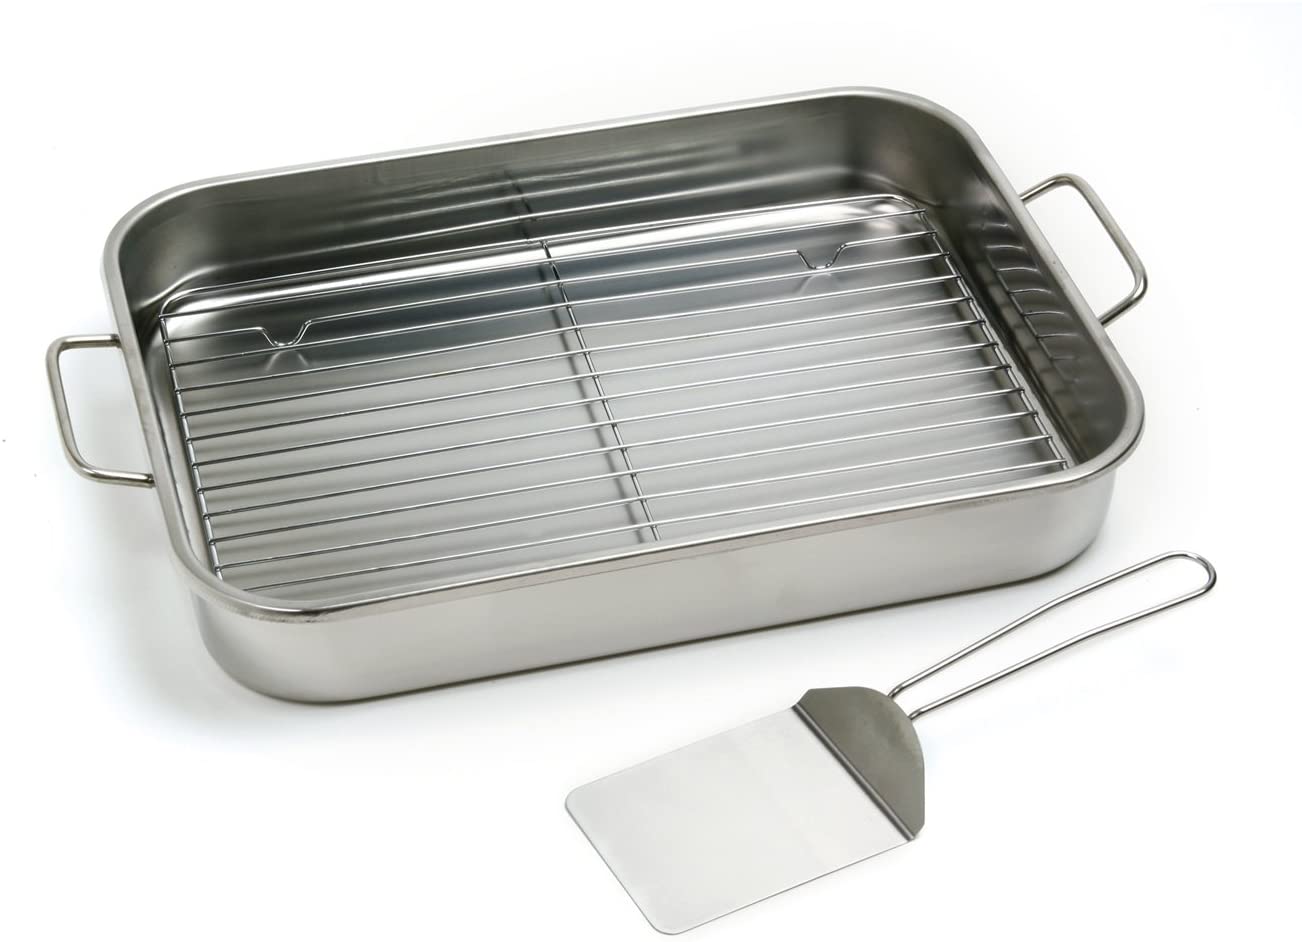 Norpro 12 by 16 Inch Stainless Steel Roast Lasagna Pan, 16 IN, Gray